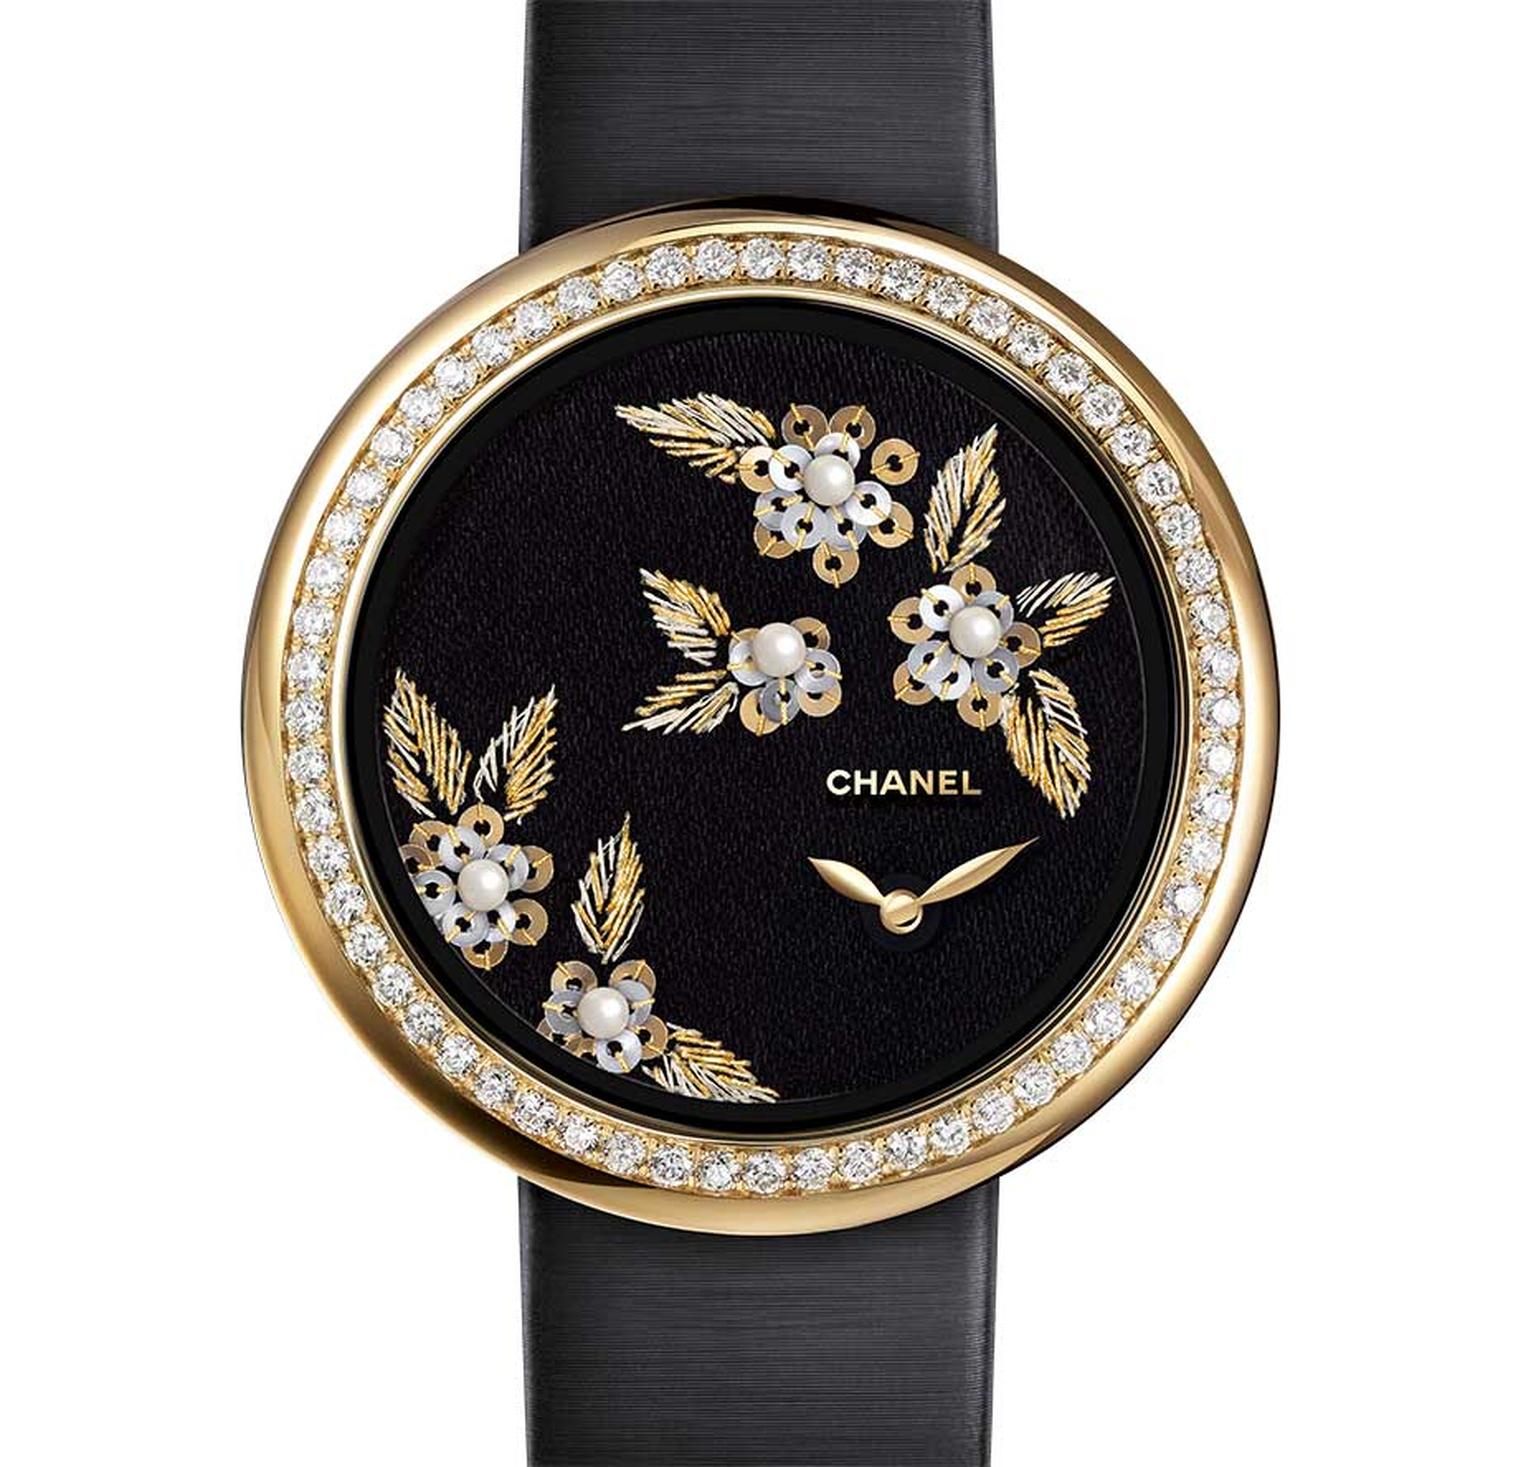 Baselworld 2014: the new Chanel Mademoiselle Prive watches for